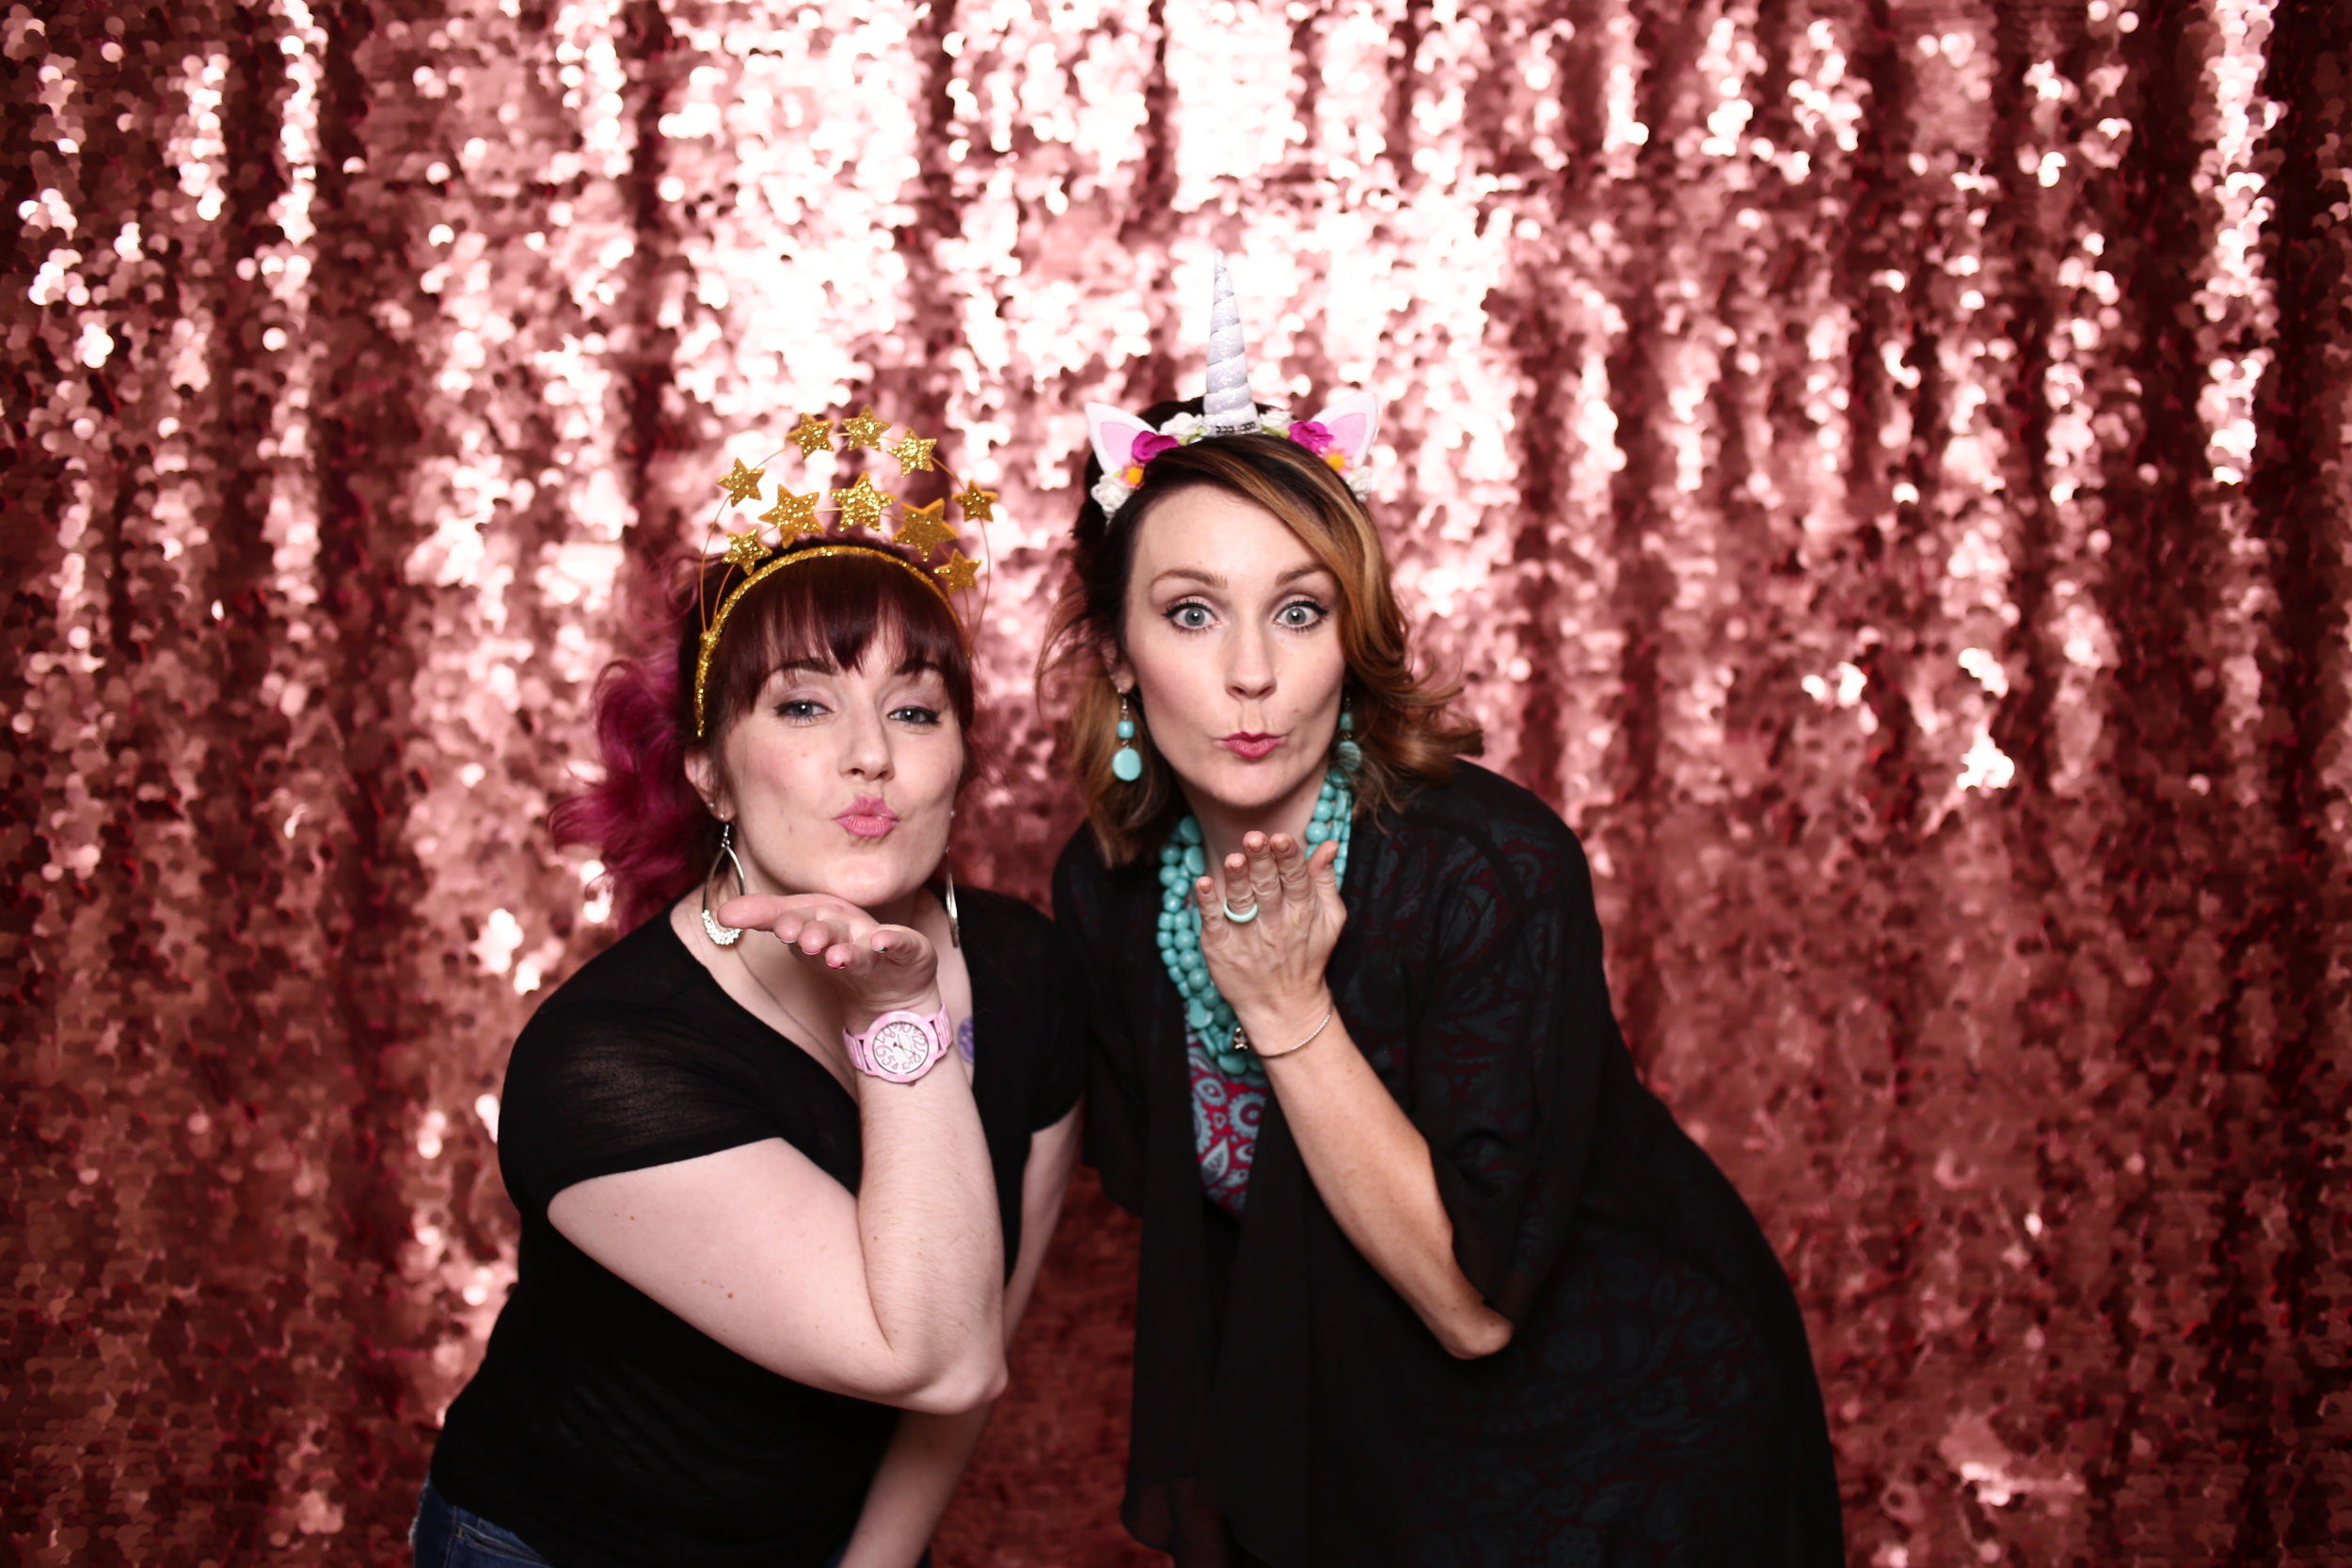 Wyoming Studio Photobooth Cheyenne Laramie Photobooth Rental Photo booth wedding party event colorado fort collins best pretty rose gold backdrop sequin large pink2.jpg